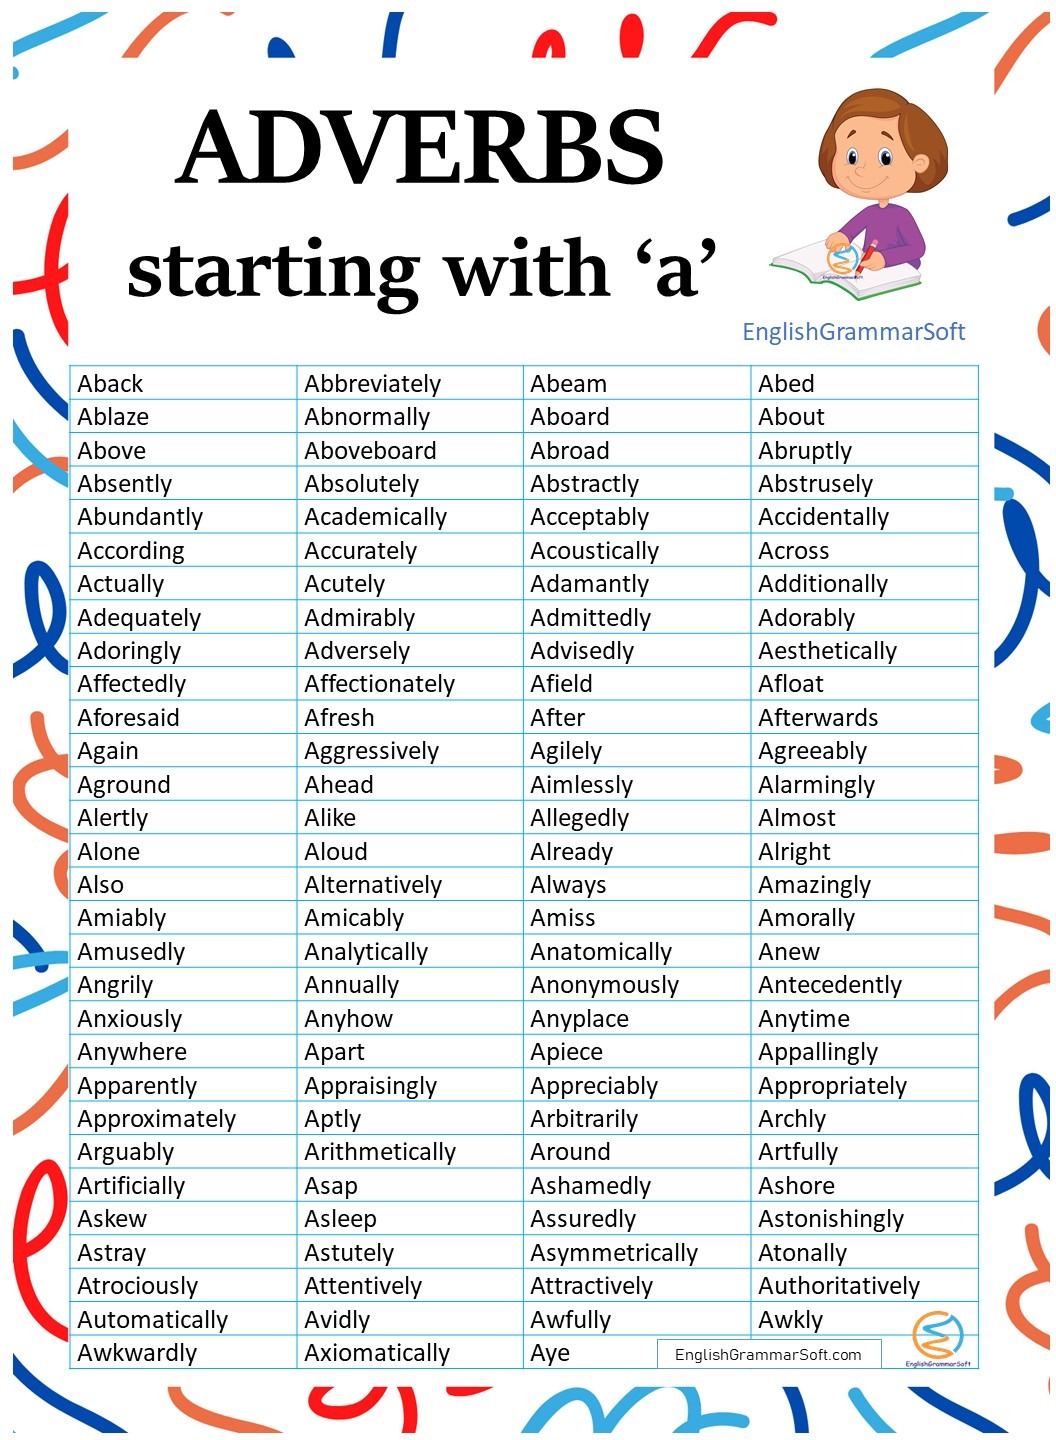 adverbs starting with a (20 example sentences)